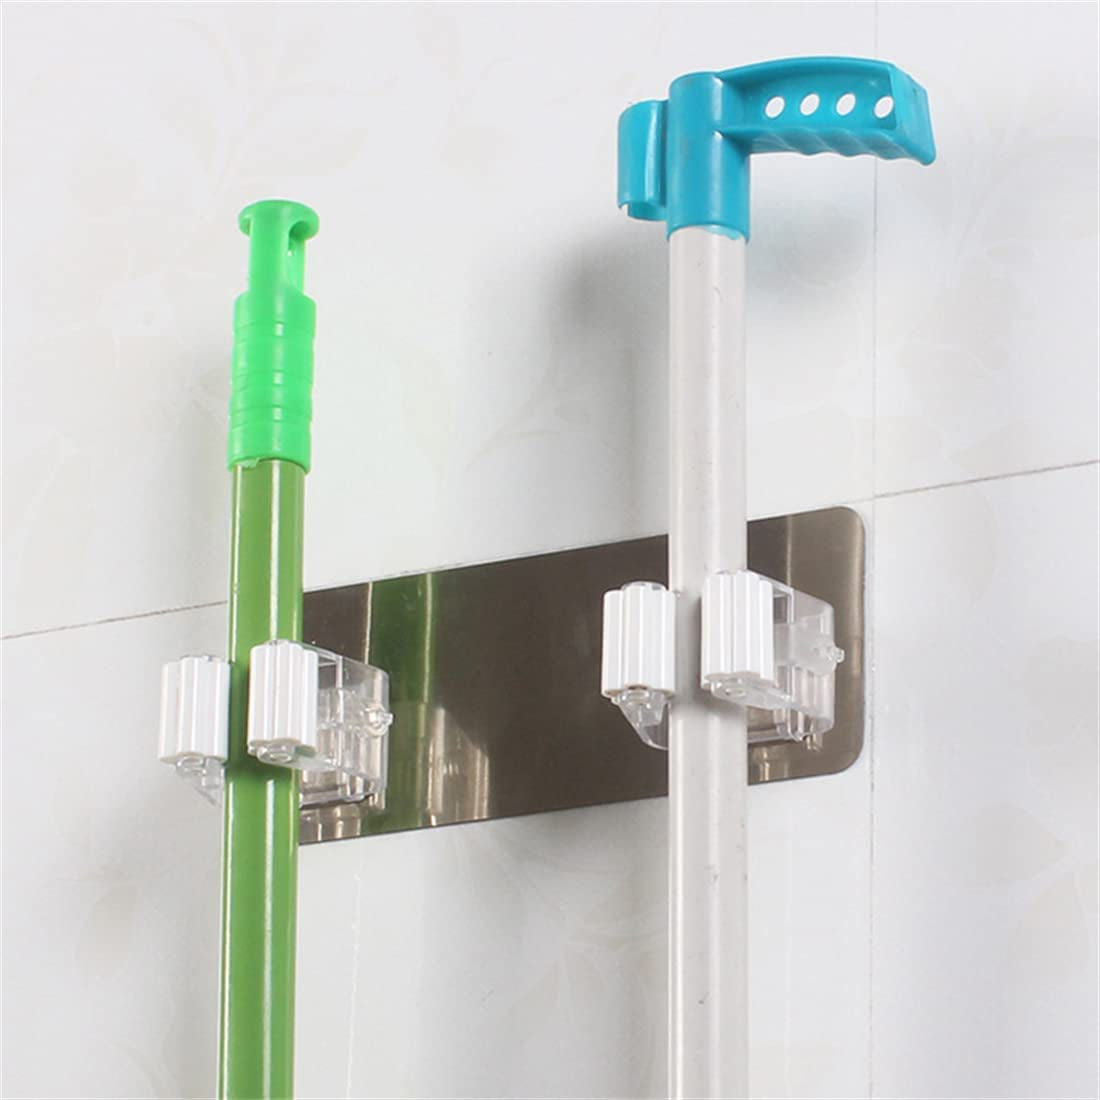 1pcs Command Broom Grippers Wall Mounted Mop Holder Brush Broom Hanger Storage Rack Kitchen Organizer Mounted Accessory Hanging Cleaning Tools Home Gadgets